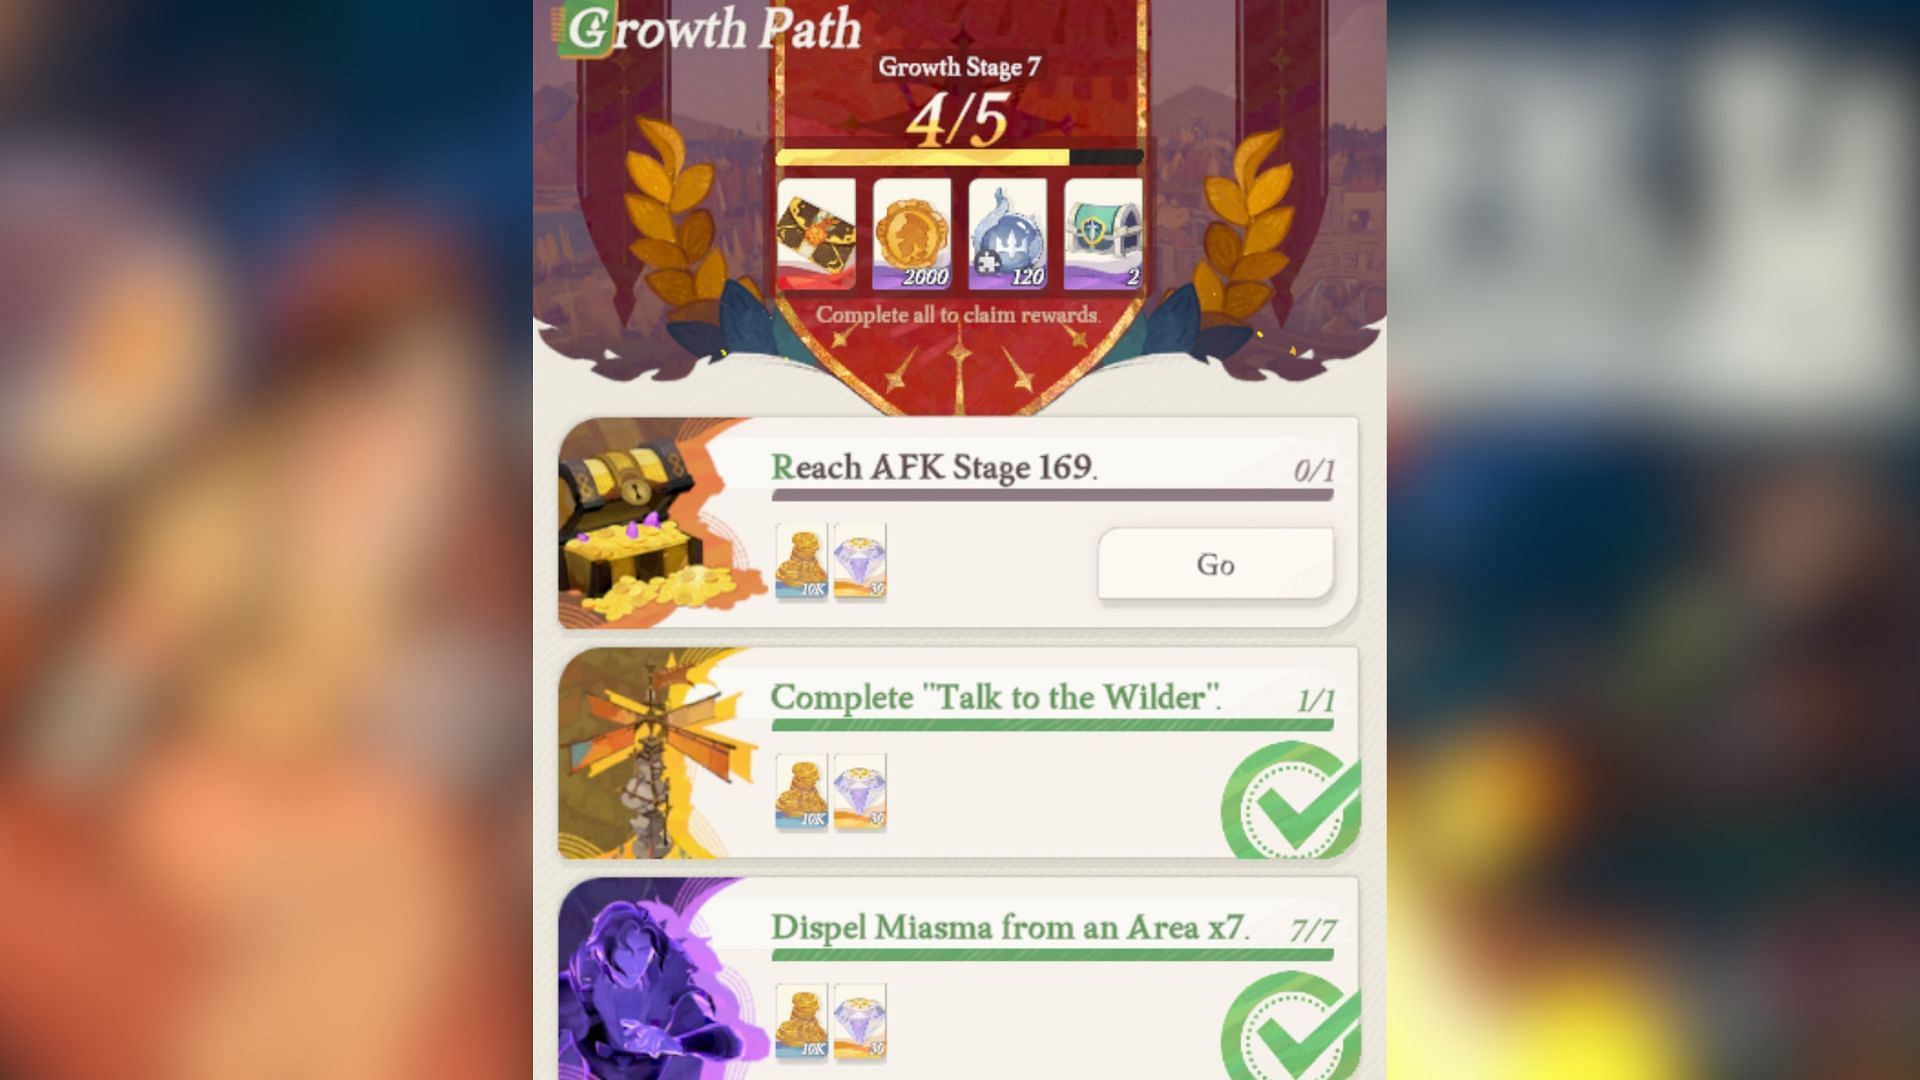 Completing various quests also rewards Diamonds and Gold in AFK Journey (Image via Farlight)